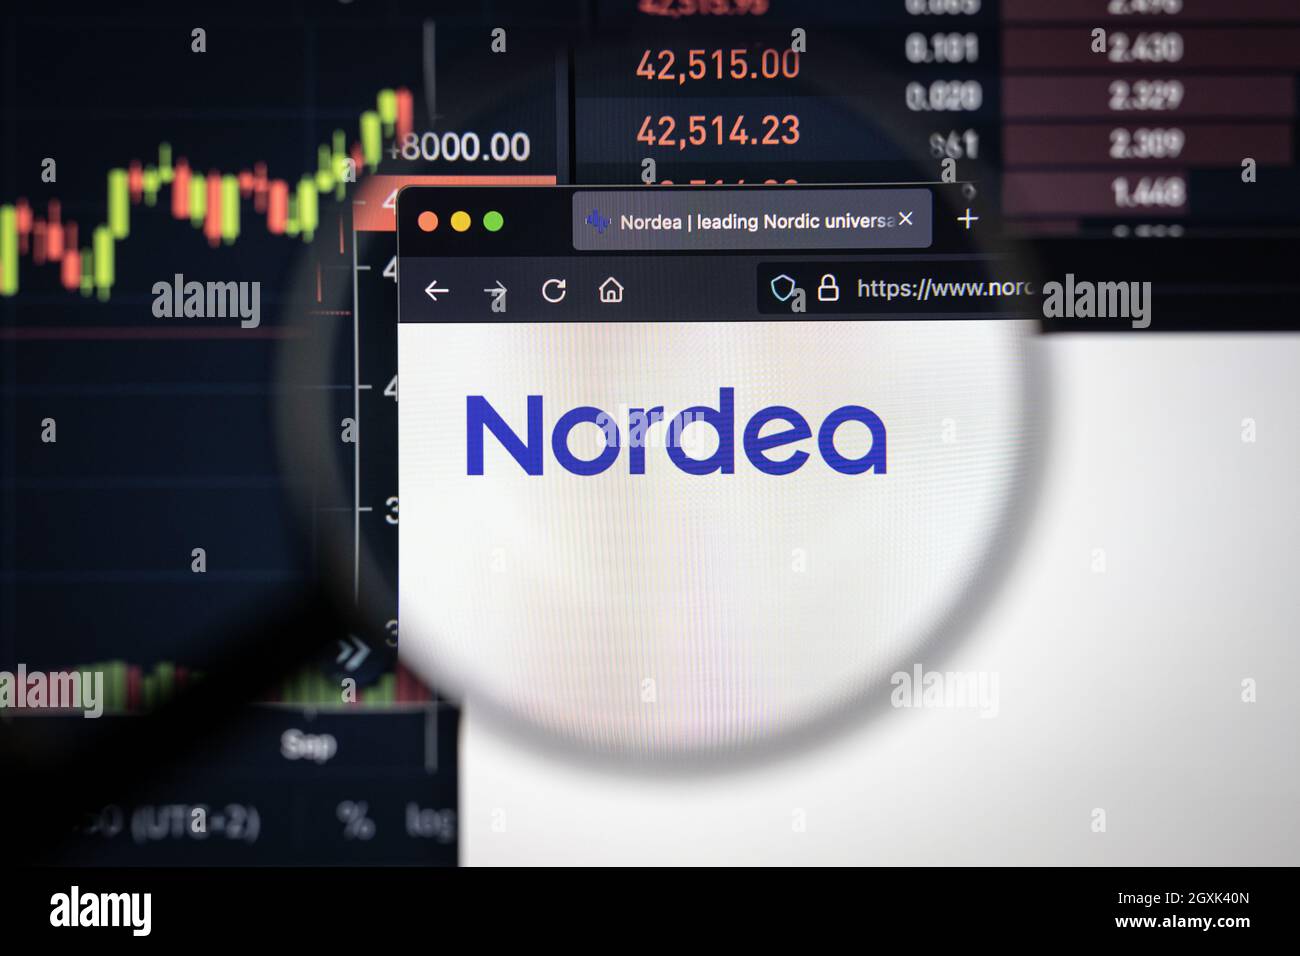 Nordea company logo on a website with blurry stock market developments in the background, seen on a computer screen through a magnifying glass Stock Photo